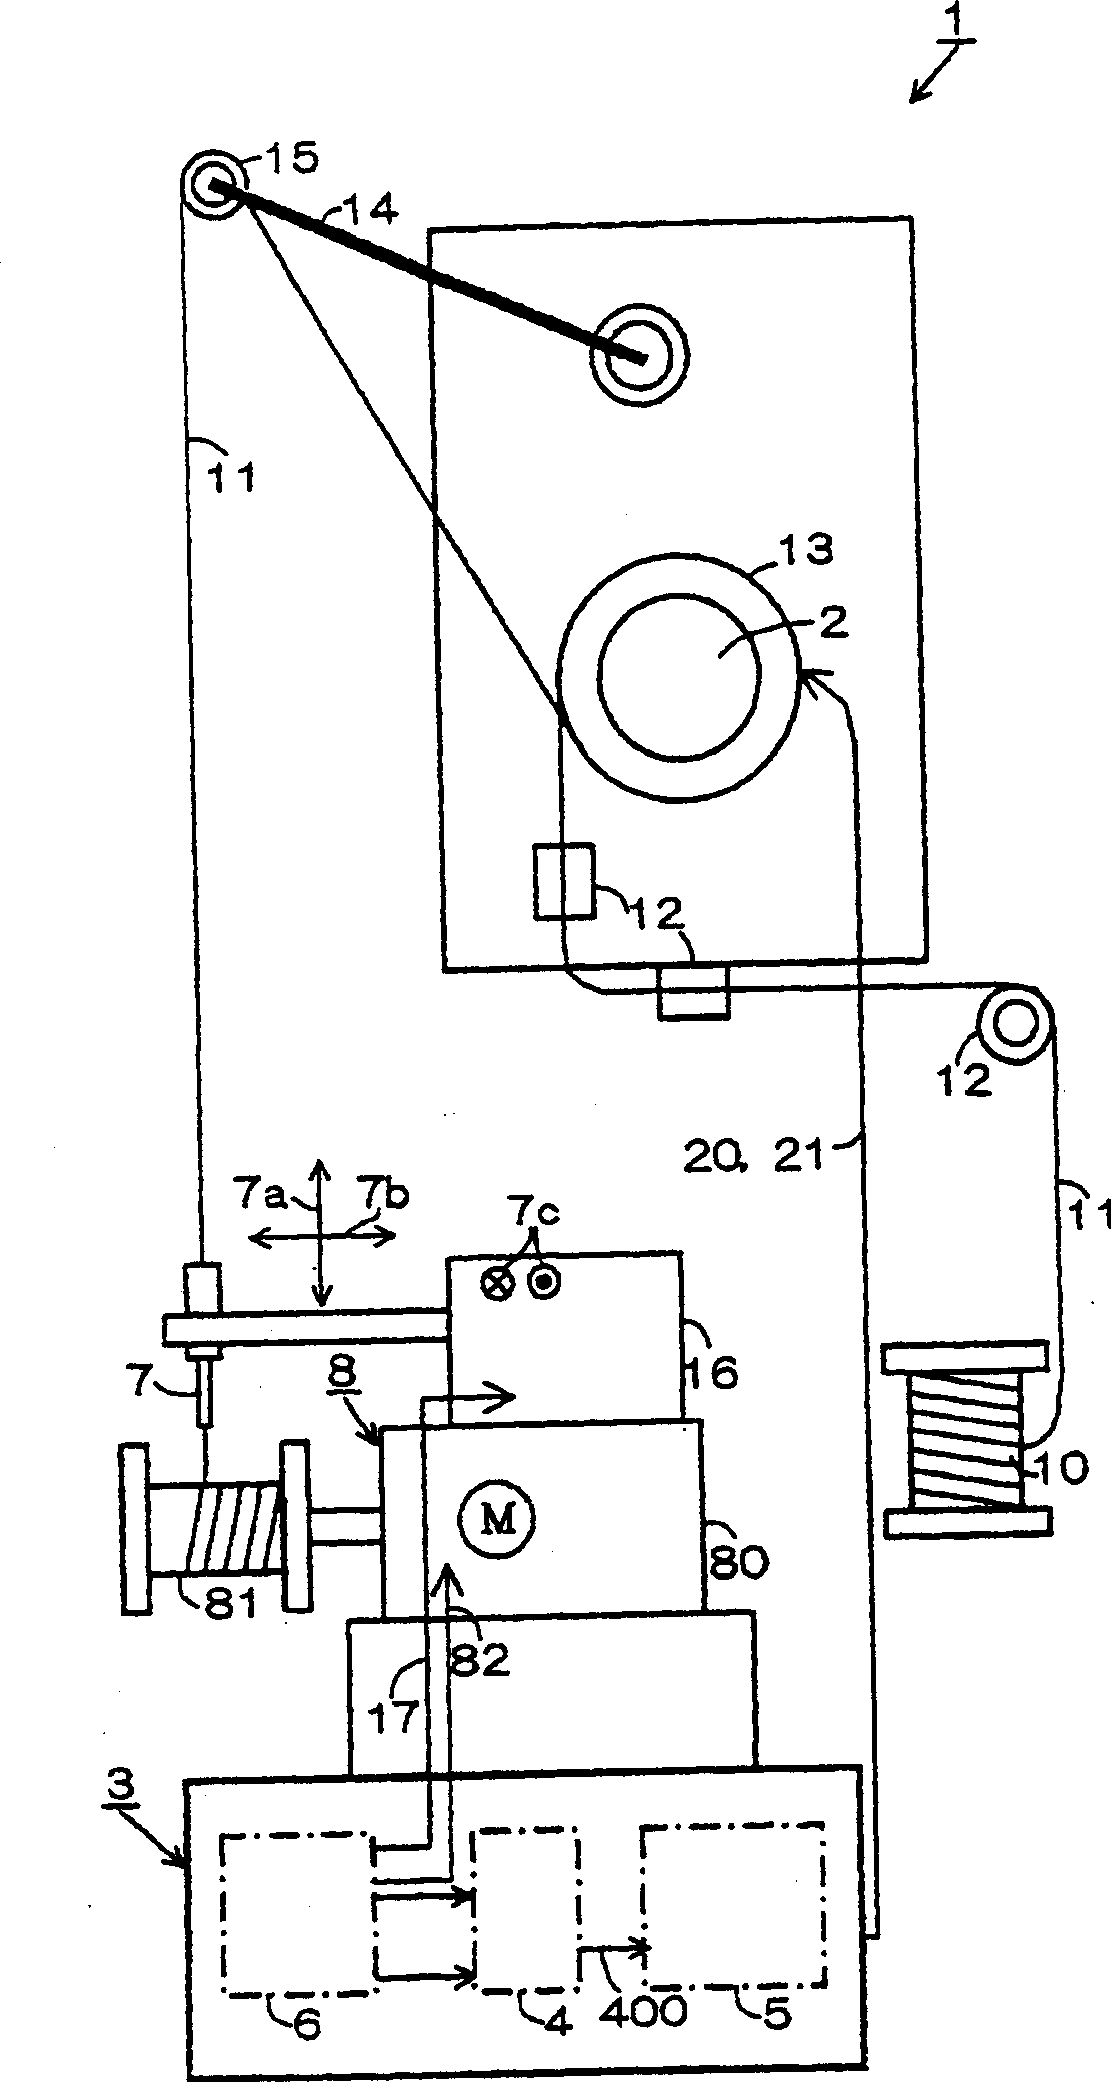 Tensioning device for coil winder and controller for hysteresis braker